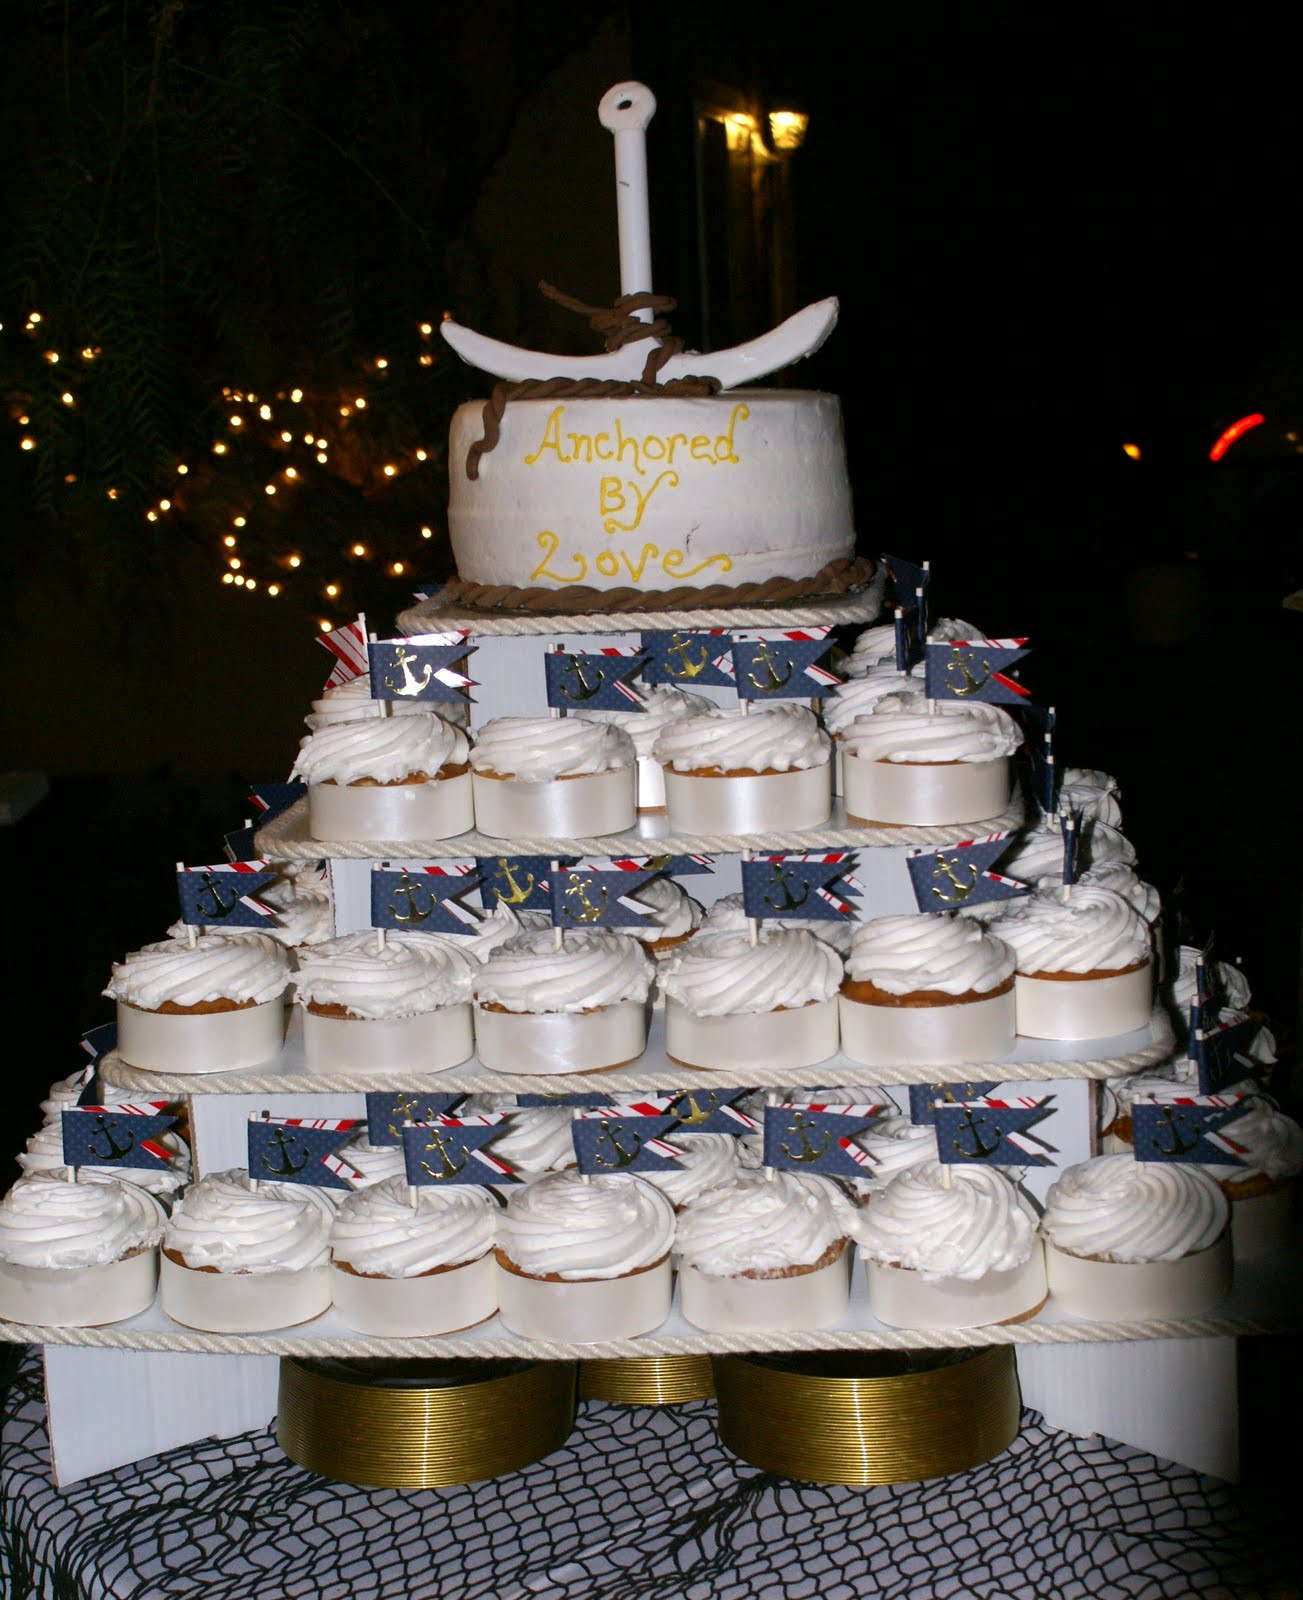 Costco Wedding Cakes Pictures
 When you purchase Costco bakery wedding cakes takes after